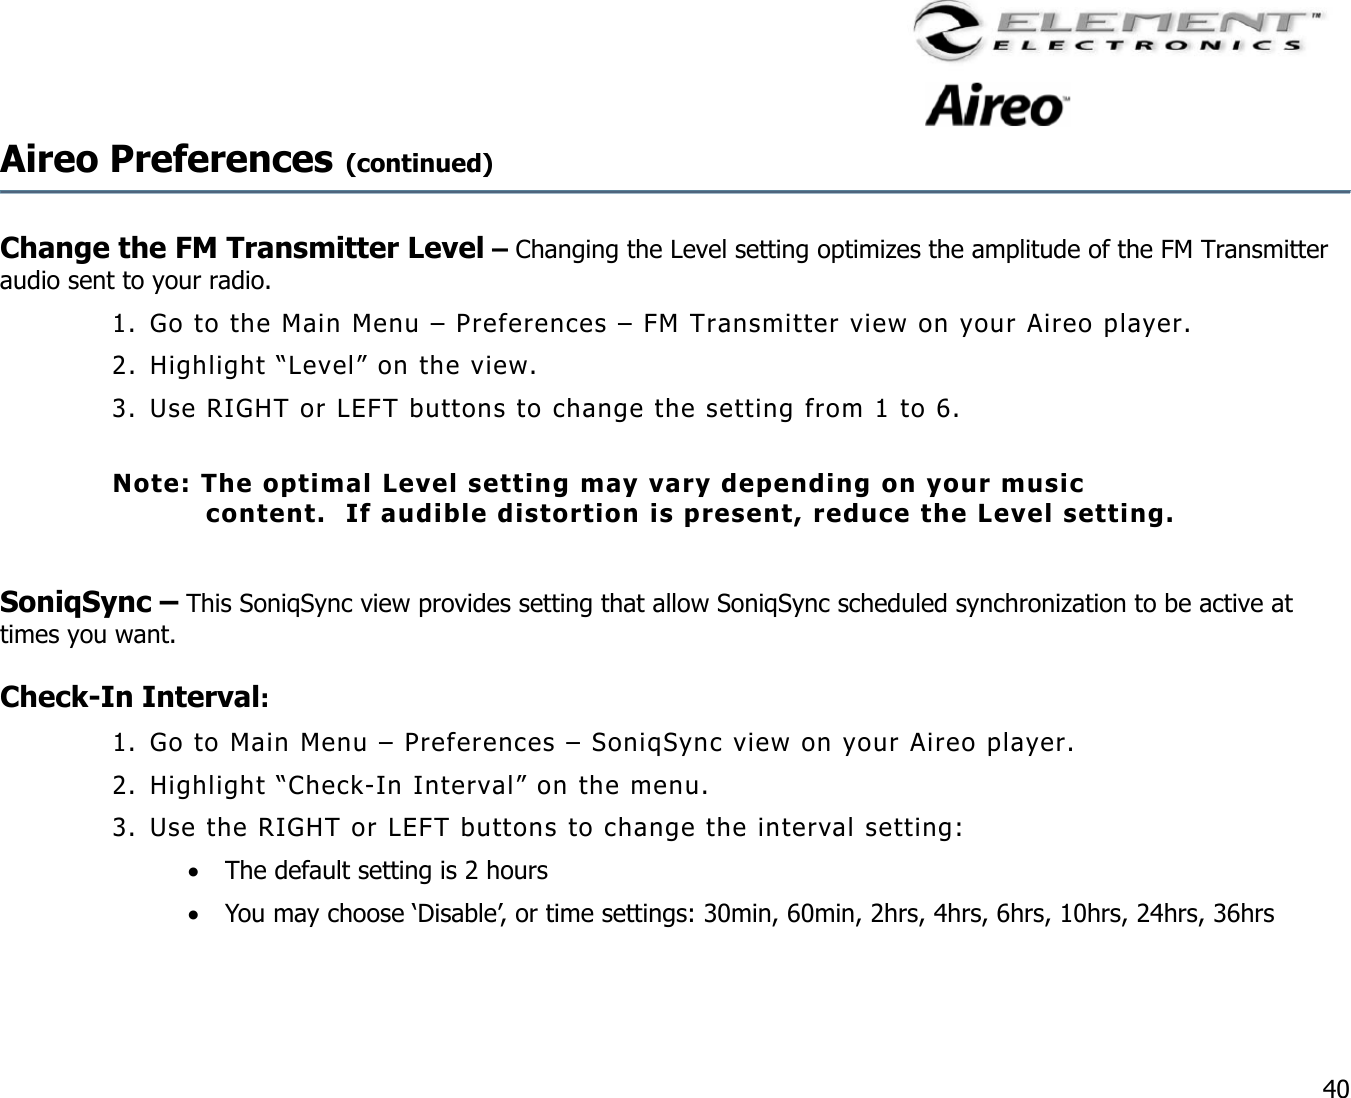                                                                                    40 Aireo Preferences (continued)     Change the FM Transmitter Level – Changing the Level setting optimizes the amplitude of the FM Transmitter audio sent to your radio.   1. Go to the Main Menu – Preferences – FM Transmitter view on your Aireo player. 2. Highlight “Level” on the view. 3. Use RIGHT or LEFT buttons to change the setting from 1 to 6.  Note: The optimal Level setting may vary depending on your music content.  If audible distortion is present, reduce the Level setting.  SoniqSync – This SoniqSync view provides setting that allow SoniqSync scheduled synchronization to be active at times you want.  Check-In Interval:  1. Go to Main Menu – Preferences – SoniqSync view on your Aireo player. 2. Highlight “Check-In Interval” on the menu. 3. Use the RIGHT or LEFT buttons to change the interval setting: •  The default setting is 2 hours •  You may choose ‘Disable’, or time settings: 30min, 60min, 2hrs, 4hrs, 6hrs, 10hrs, 24hrs, 36hrs   